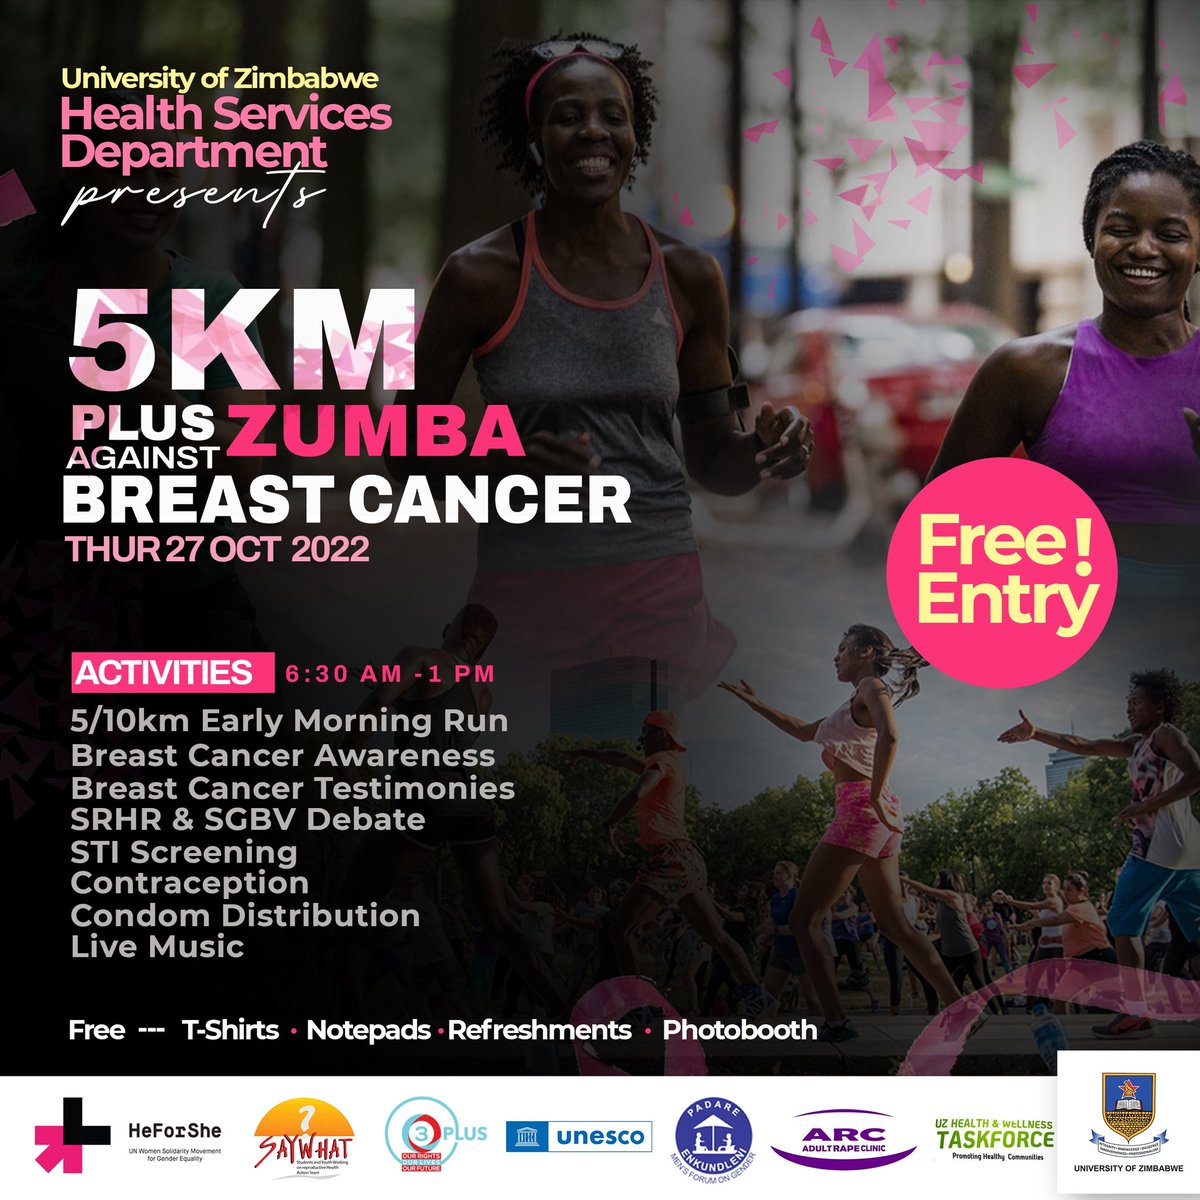 As Padare Enkundleni Men's Forum on Gender University of Zimbabwe Chapter, we have partnered with several other clubs with UNESCO and 03 plus in commemmorating Breast Cancer Awareness
Come join us and make a change @VingiPaul @PadareMen @unwomenzw @SwedeninZW @Clive_G_Wacho